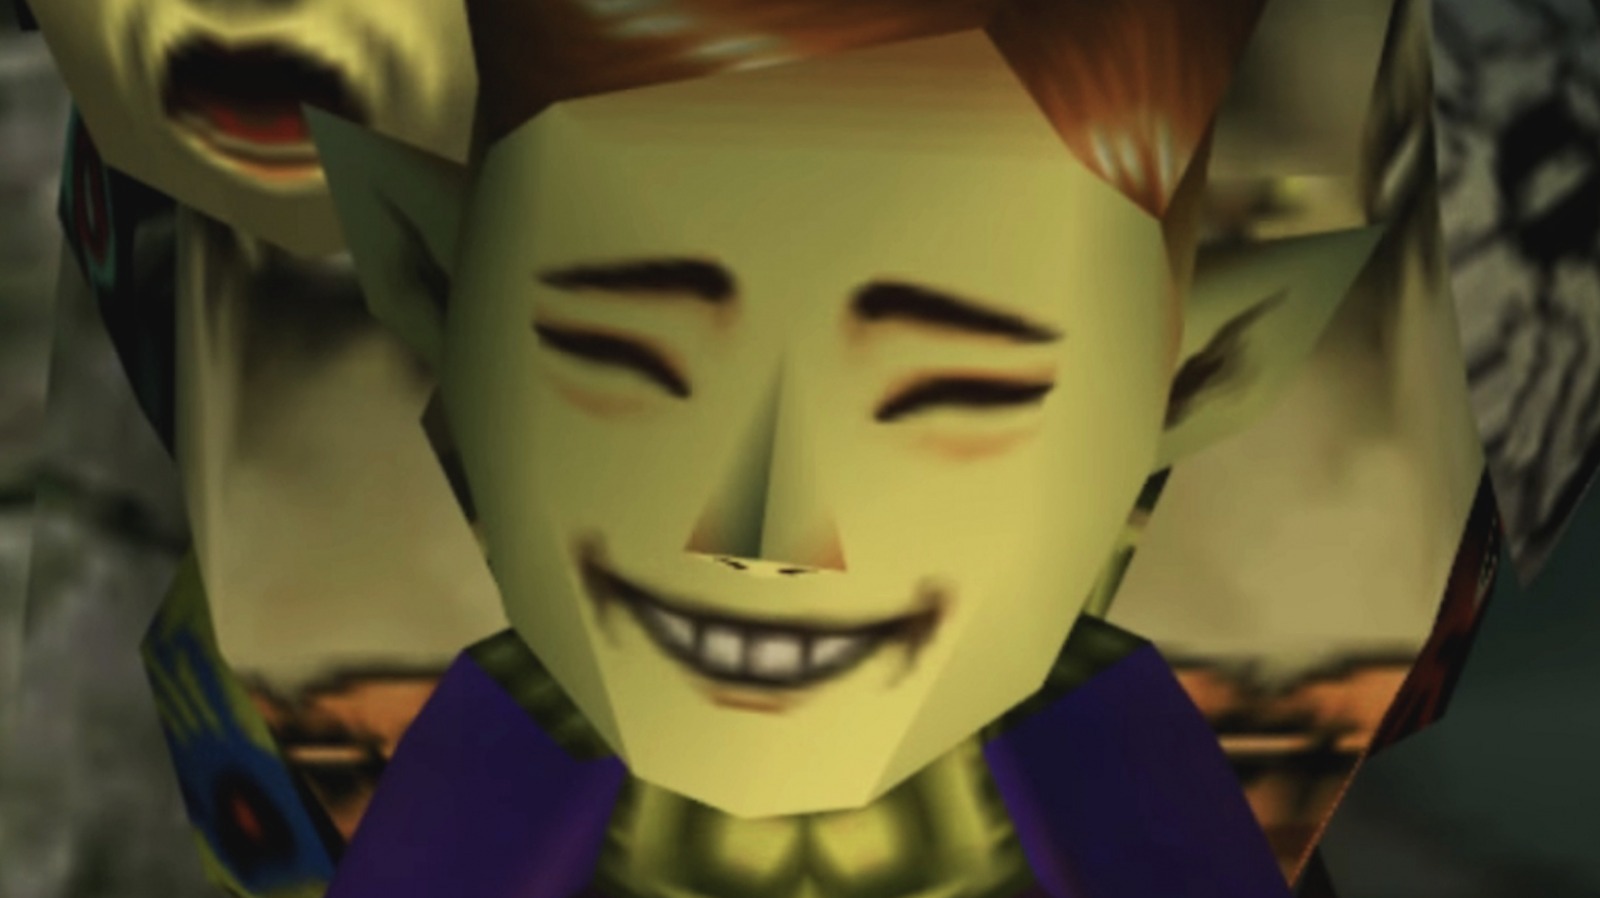 20 Years After Its Release, The Legend of Zelda: Majora's Mask Is